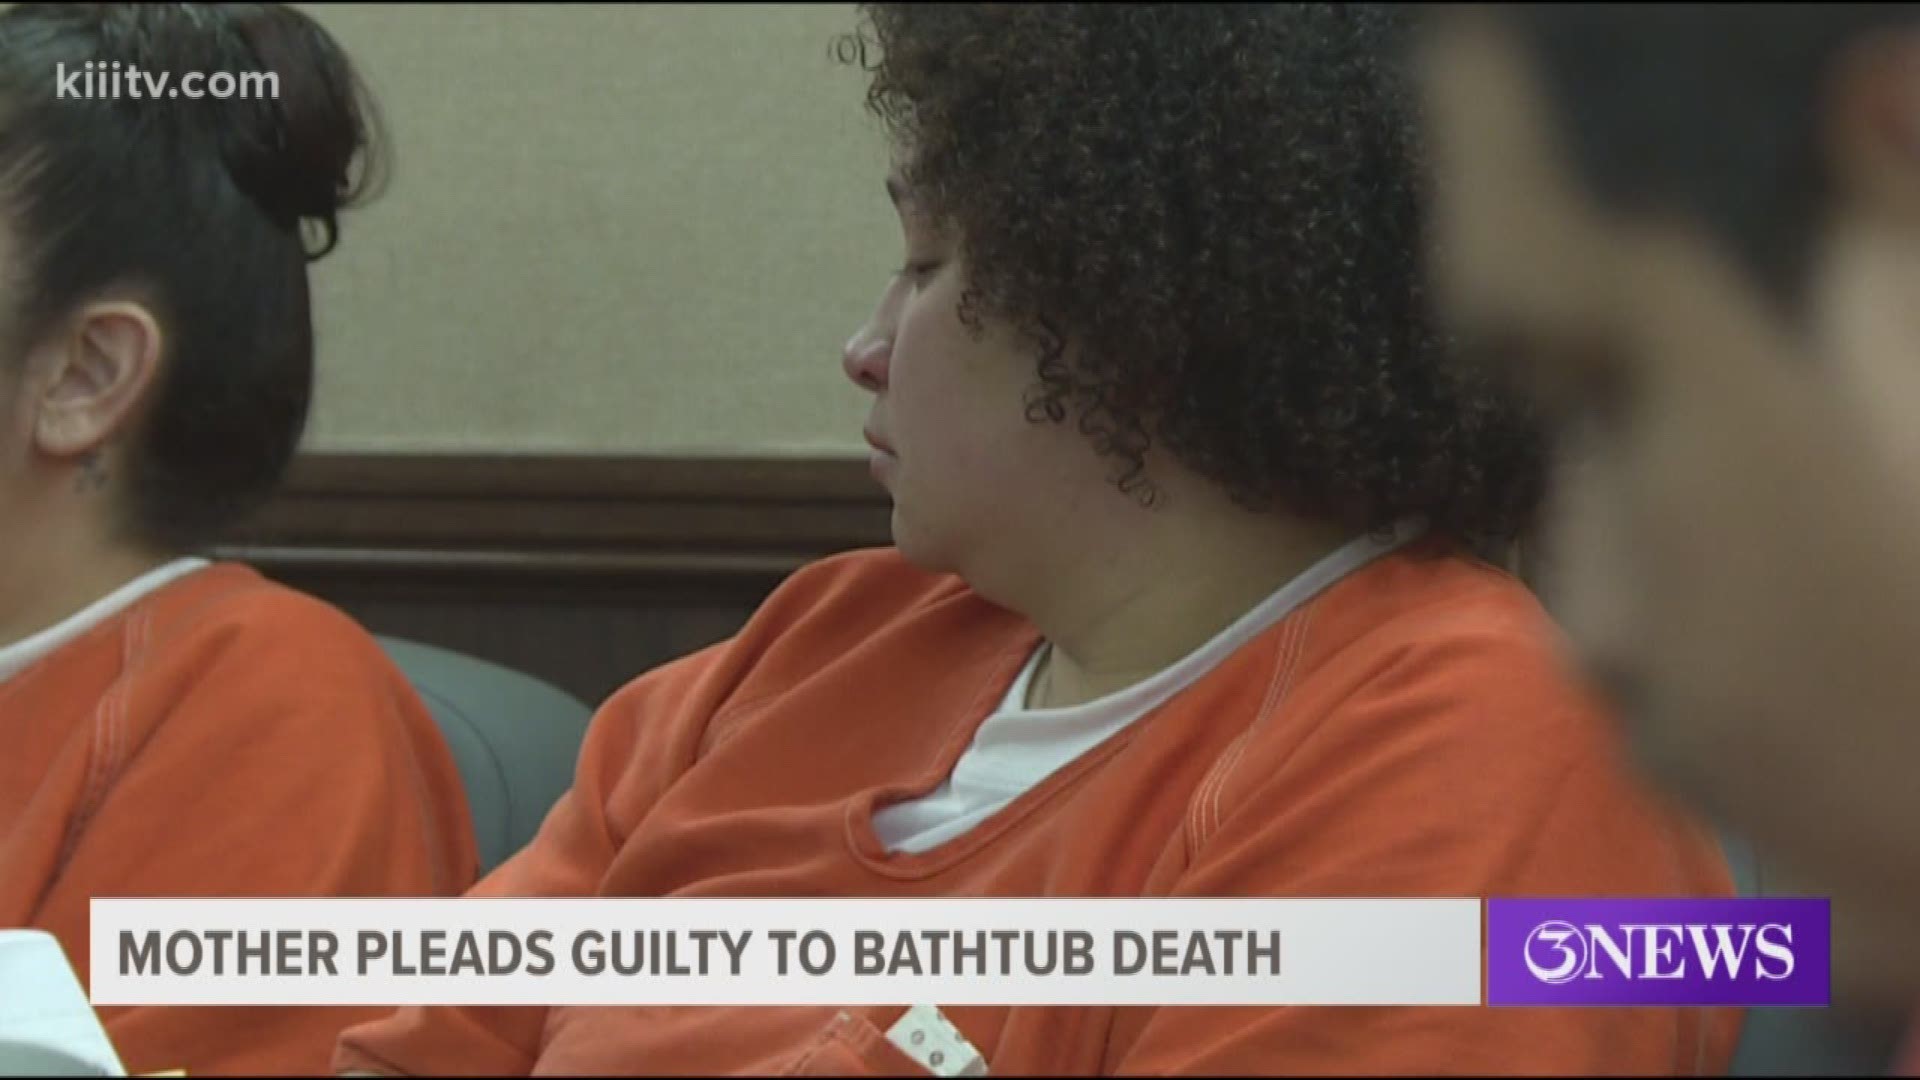 The mother of an 11-month-old boy who drowned in a bathtub on July 26 of last year has pleaded guilty the abandonment and endangerment of a child.